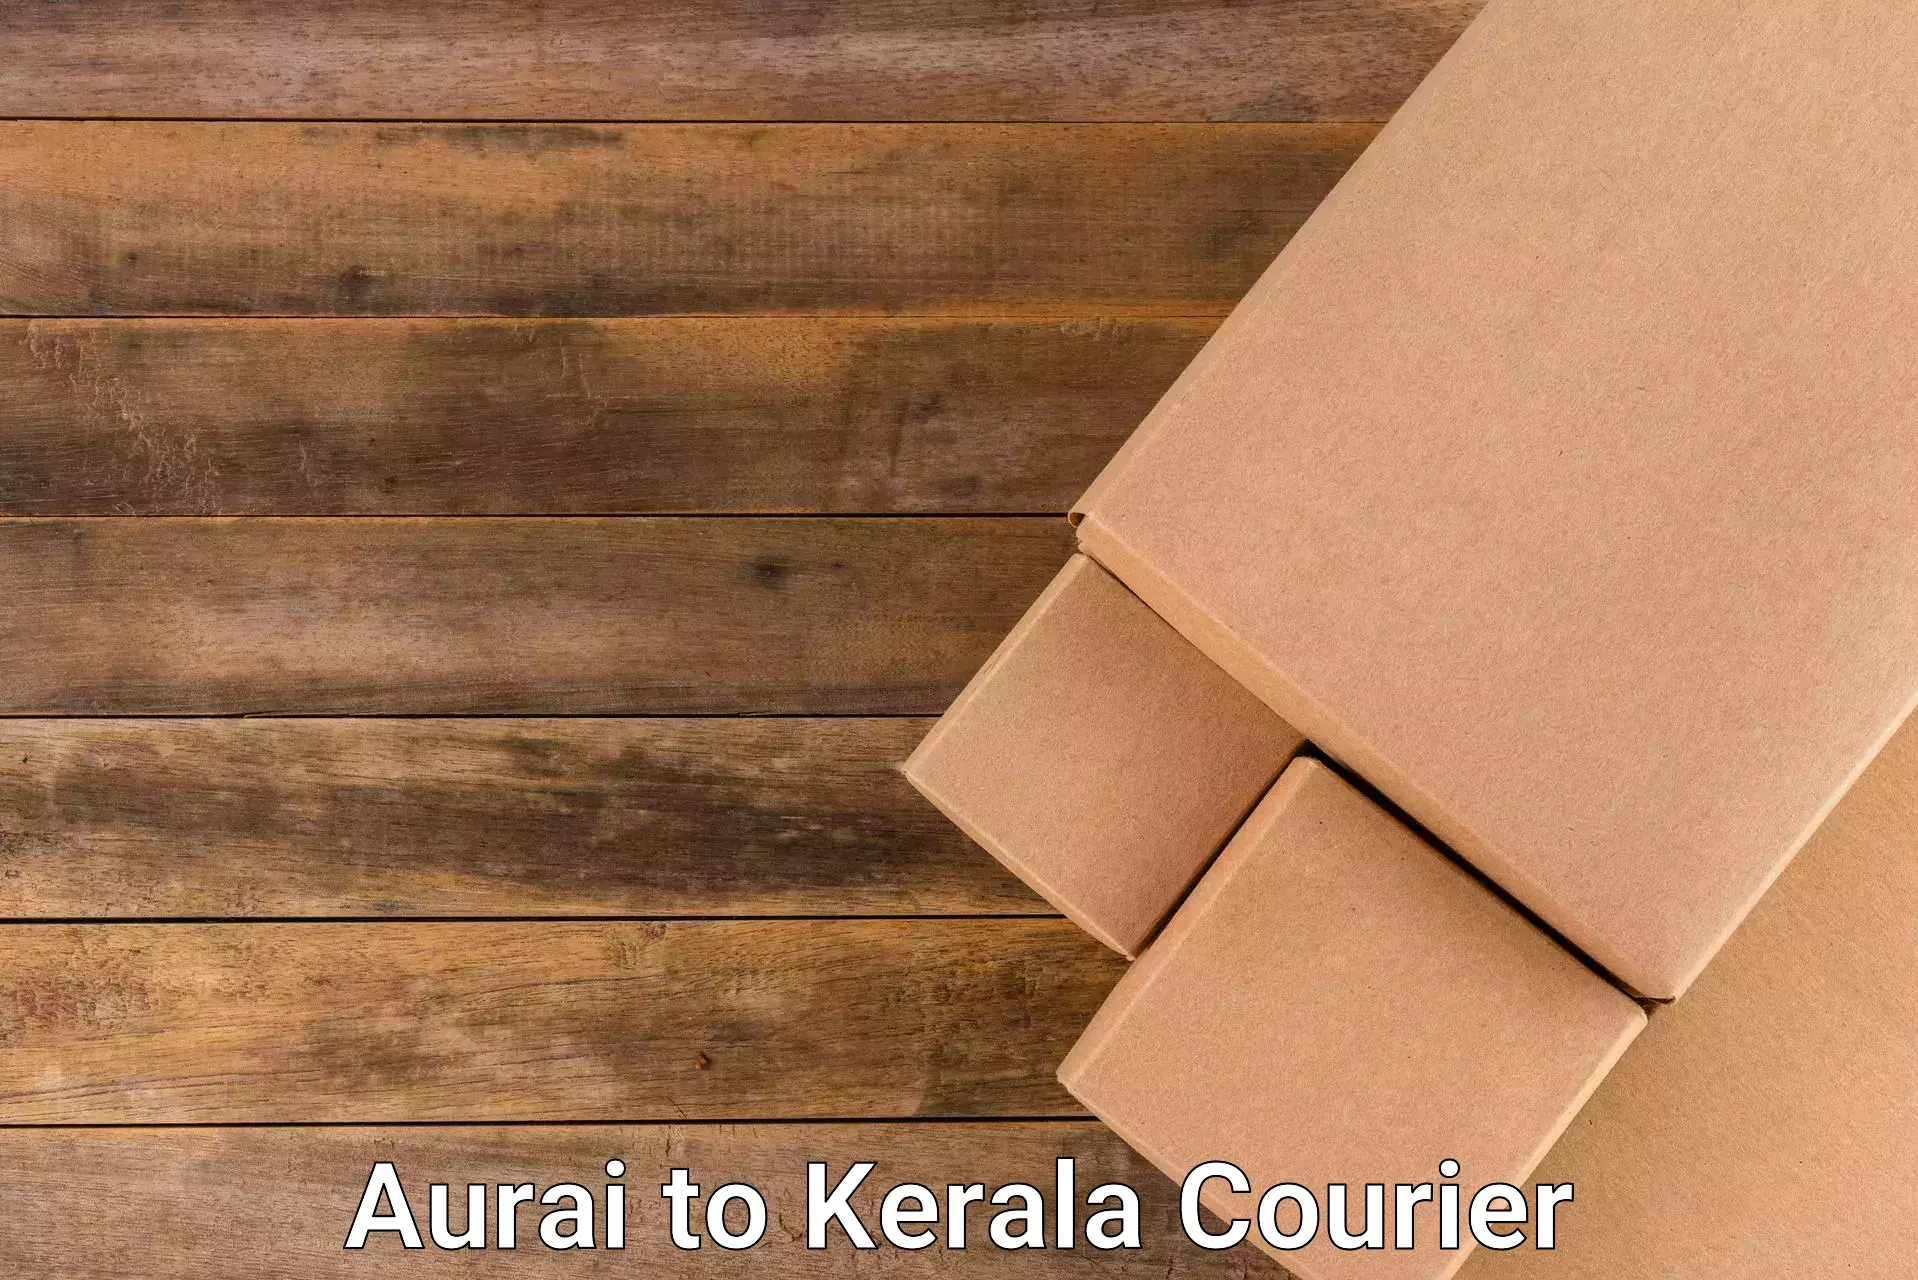 Express delivery capabilities in Aurai to Kerala